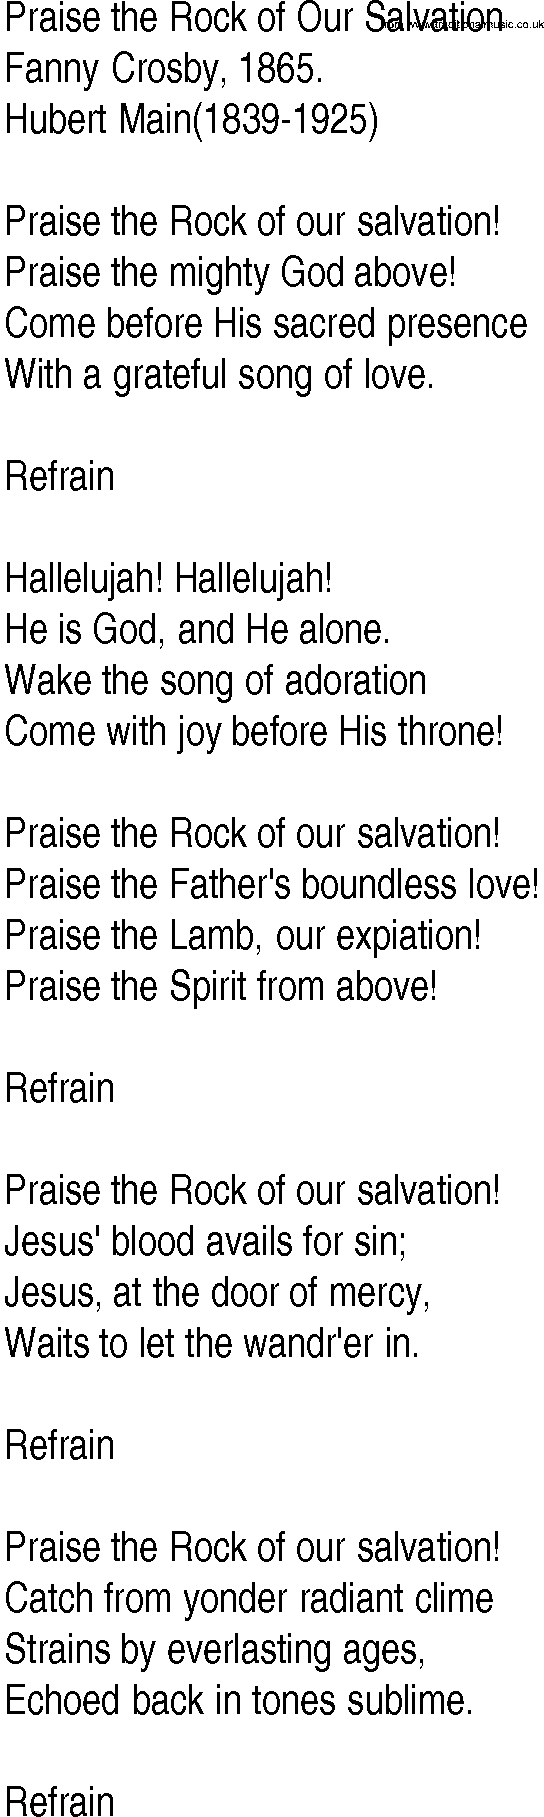 Hymn and Gospel Song: Praise the Rock of Our Salvation by Fanny Crosby lyrics